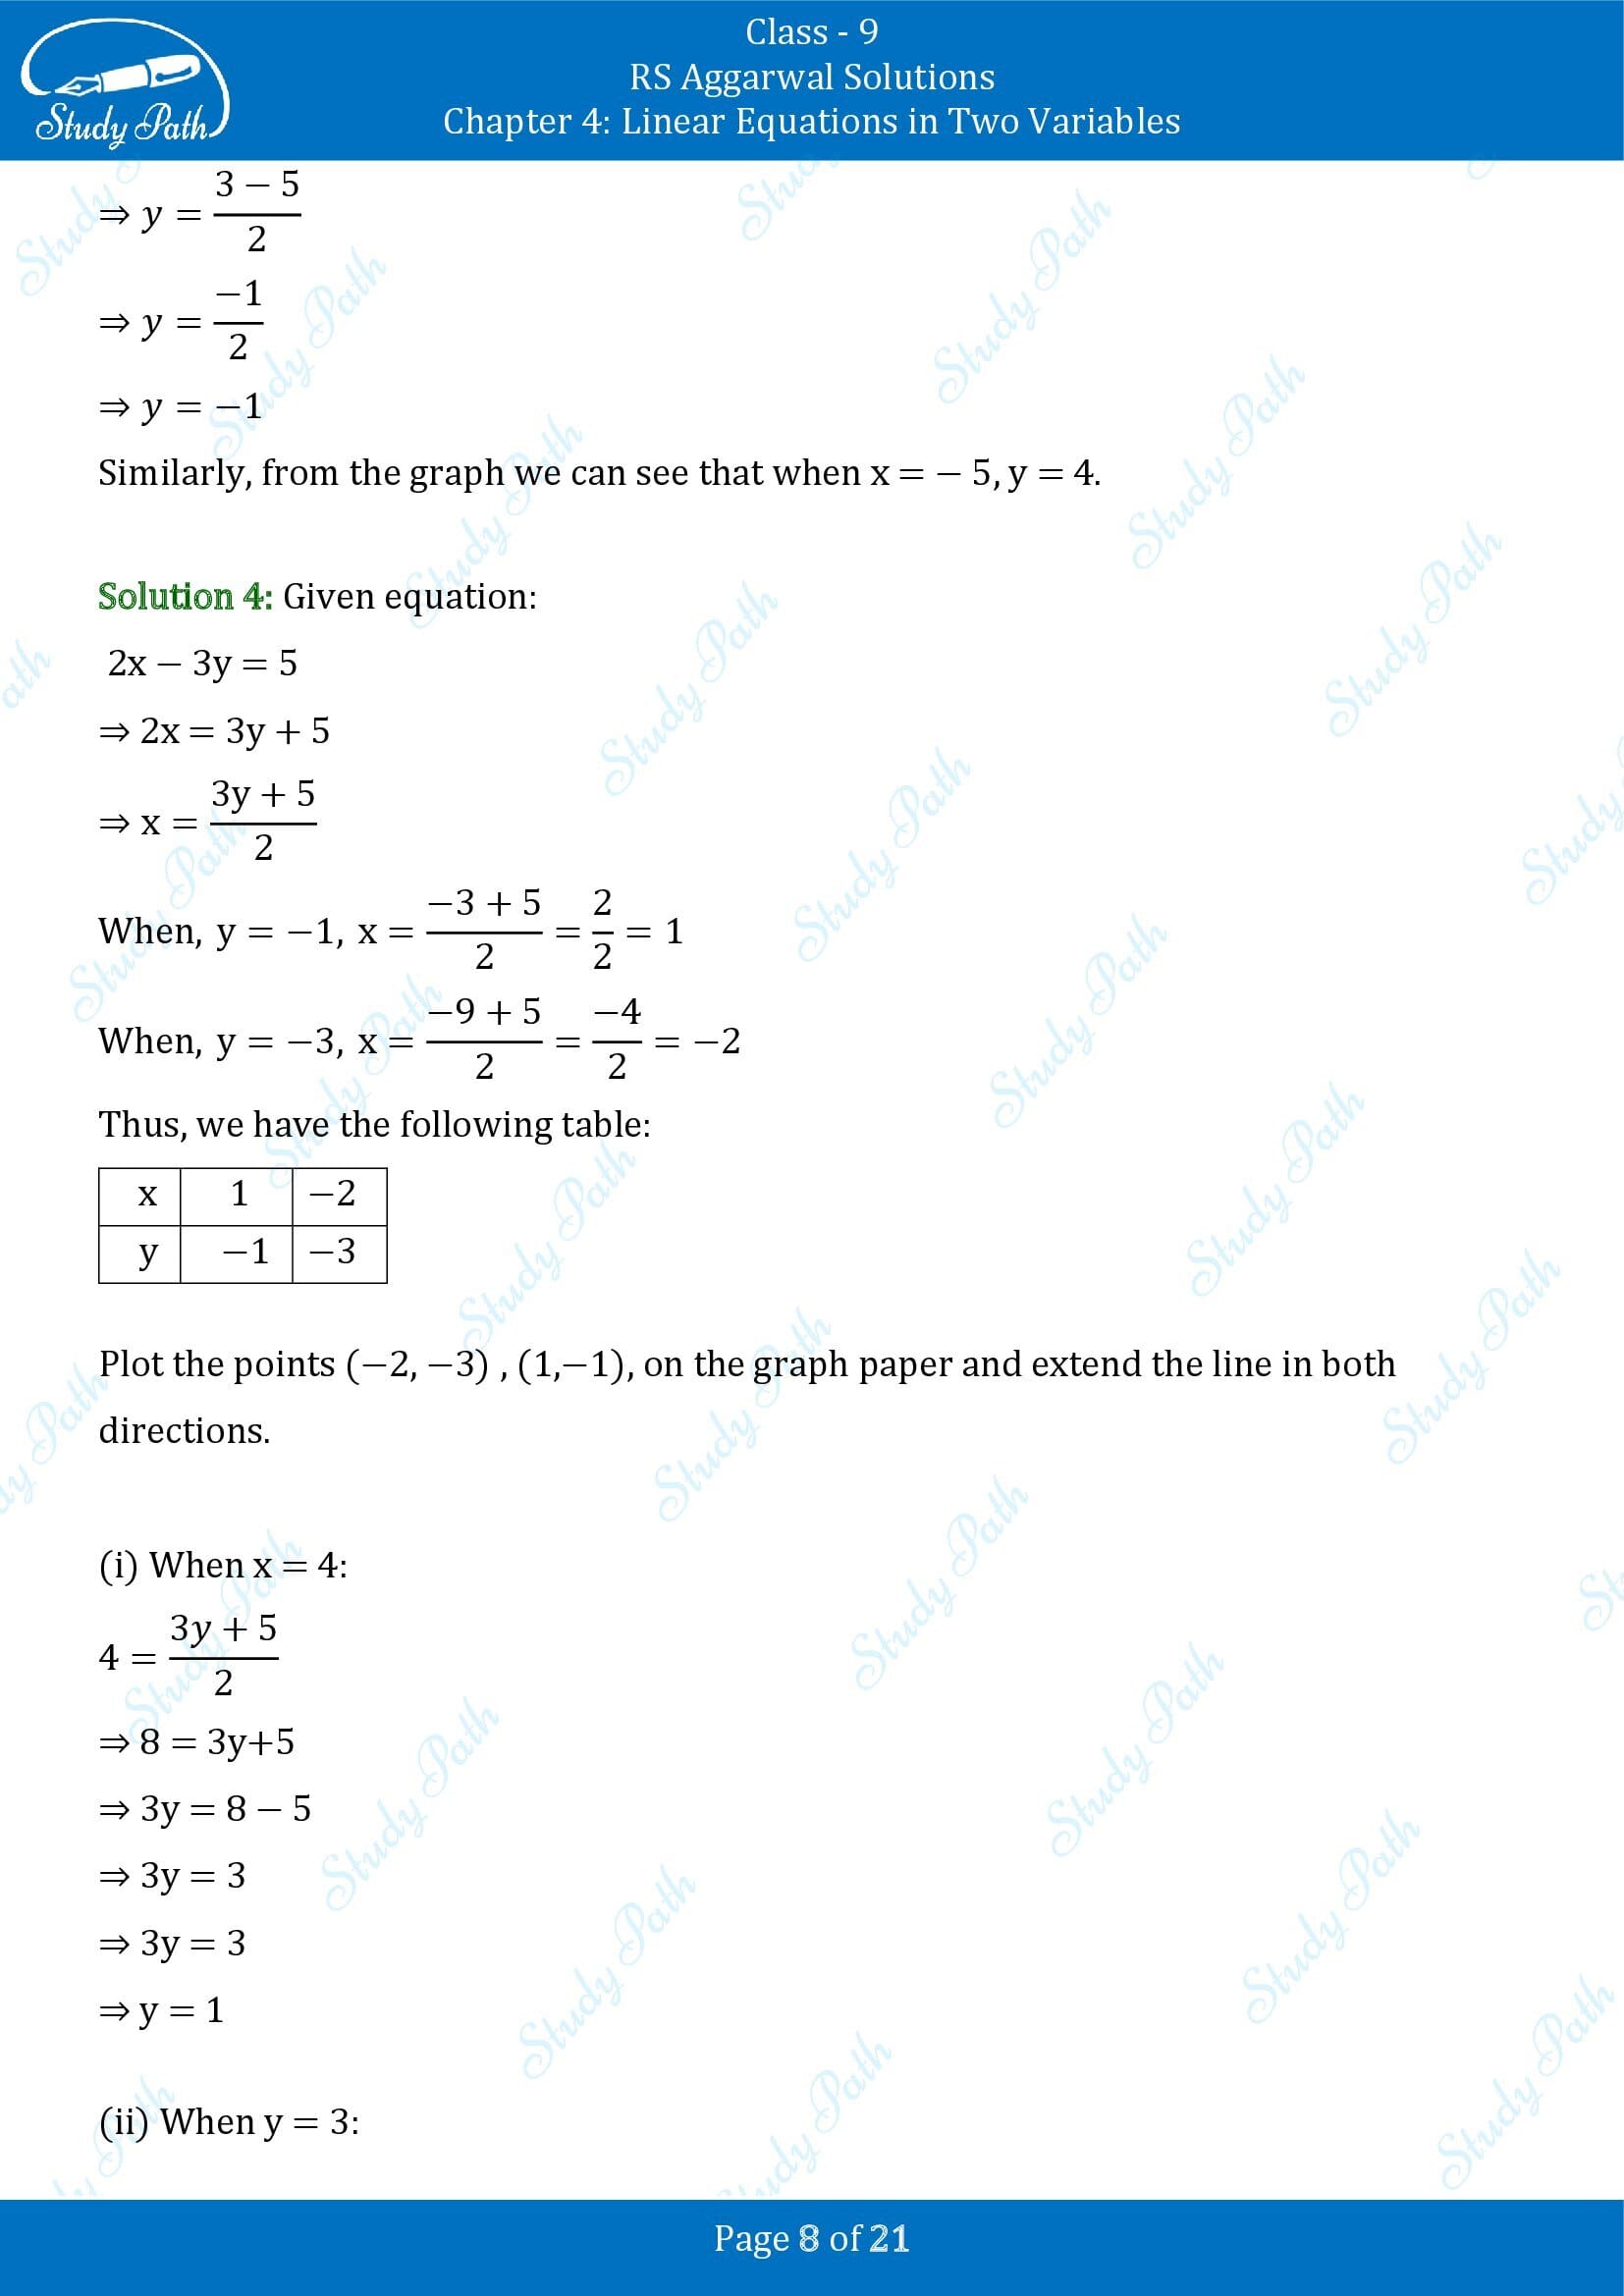 RS Aggarwal Solutions Class 9 Chapter 4 Linear Equations in Two Variables Exercise 4B 00008